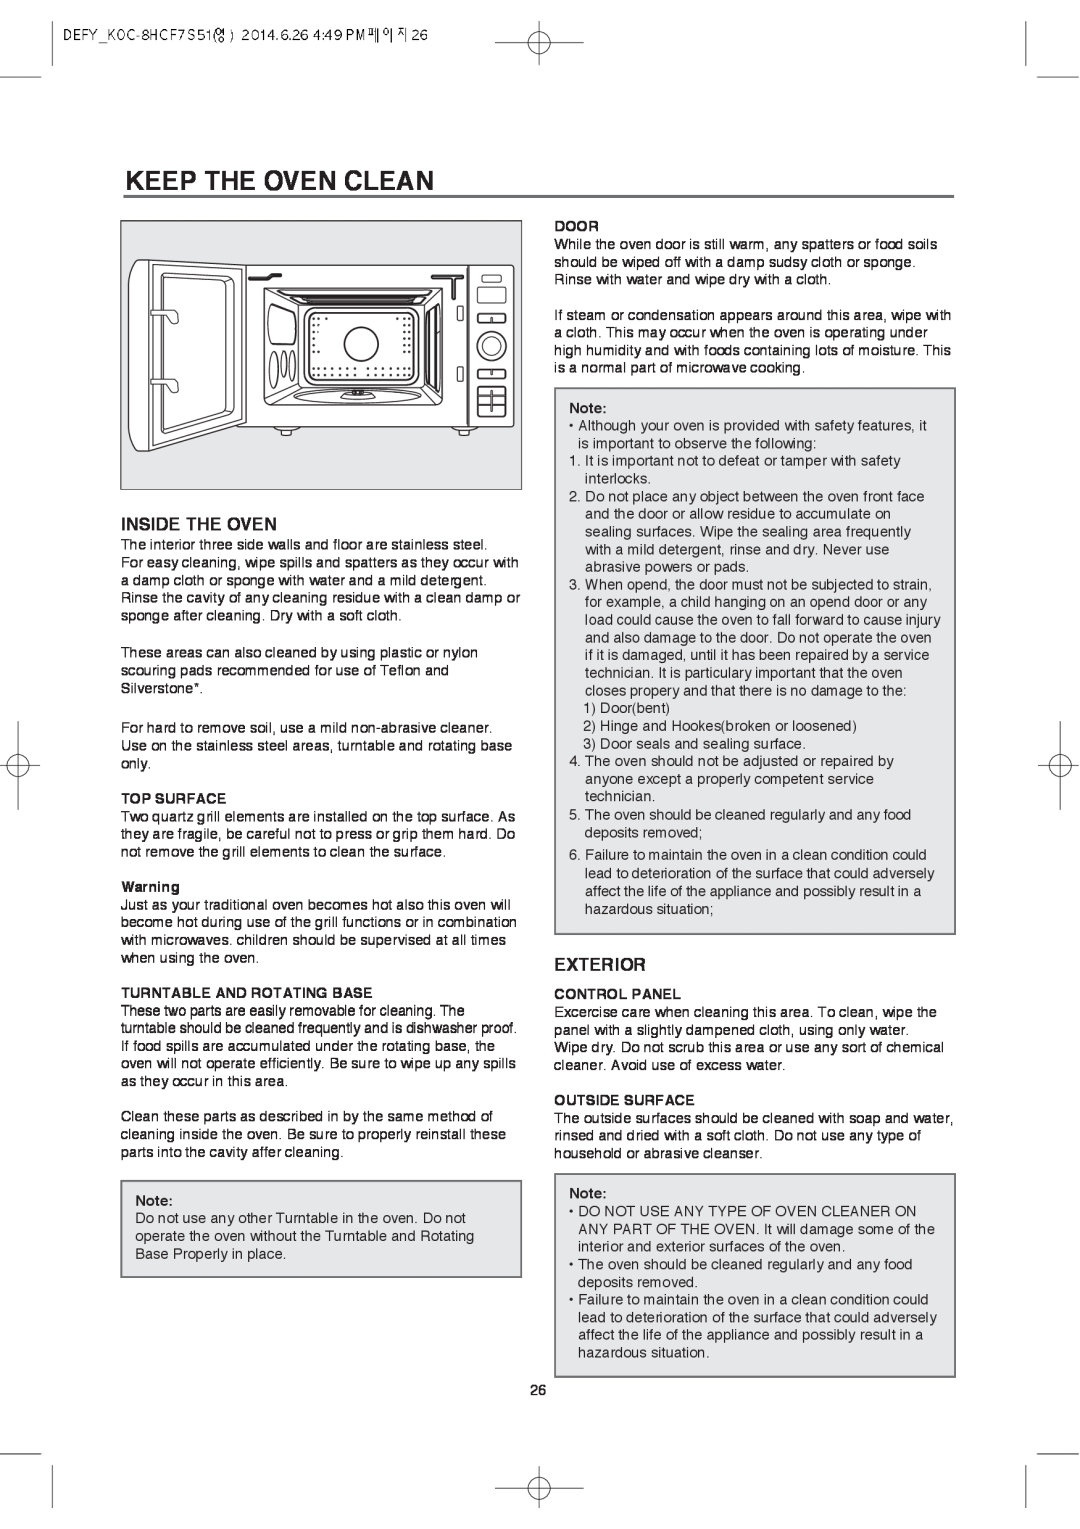 Defy Appliances MWA 2434 MM user manual Keep The Oven Clean, Inside The Oven, Exterior 